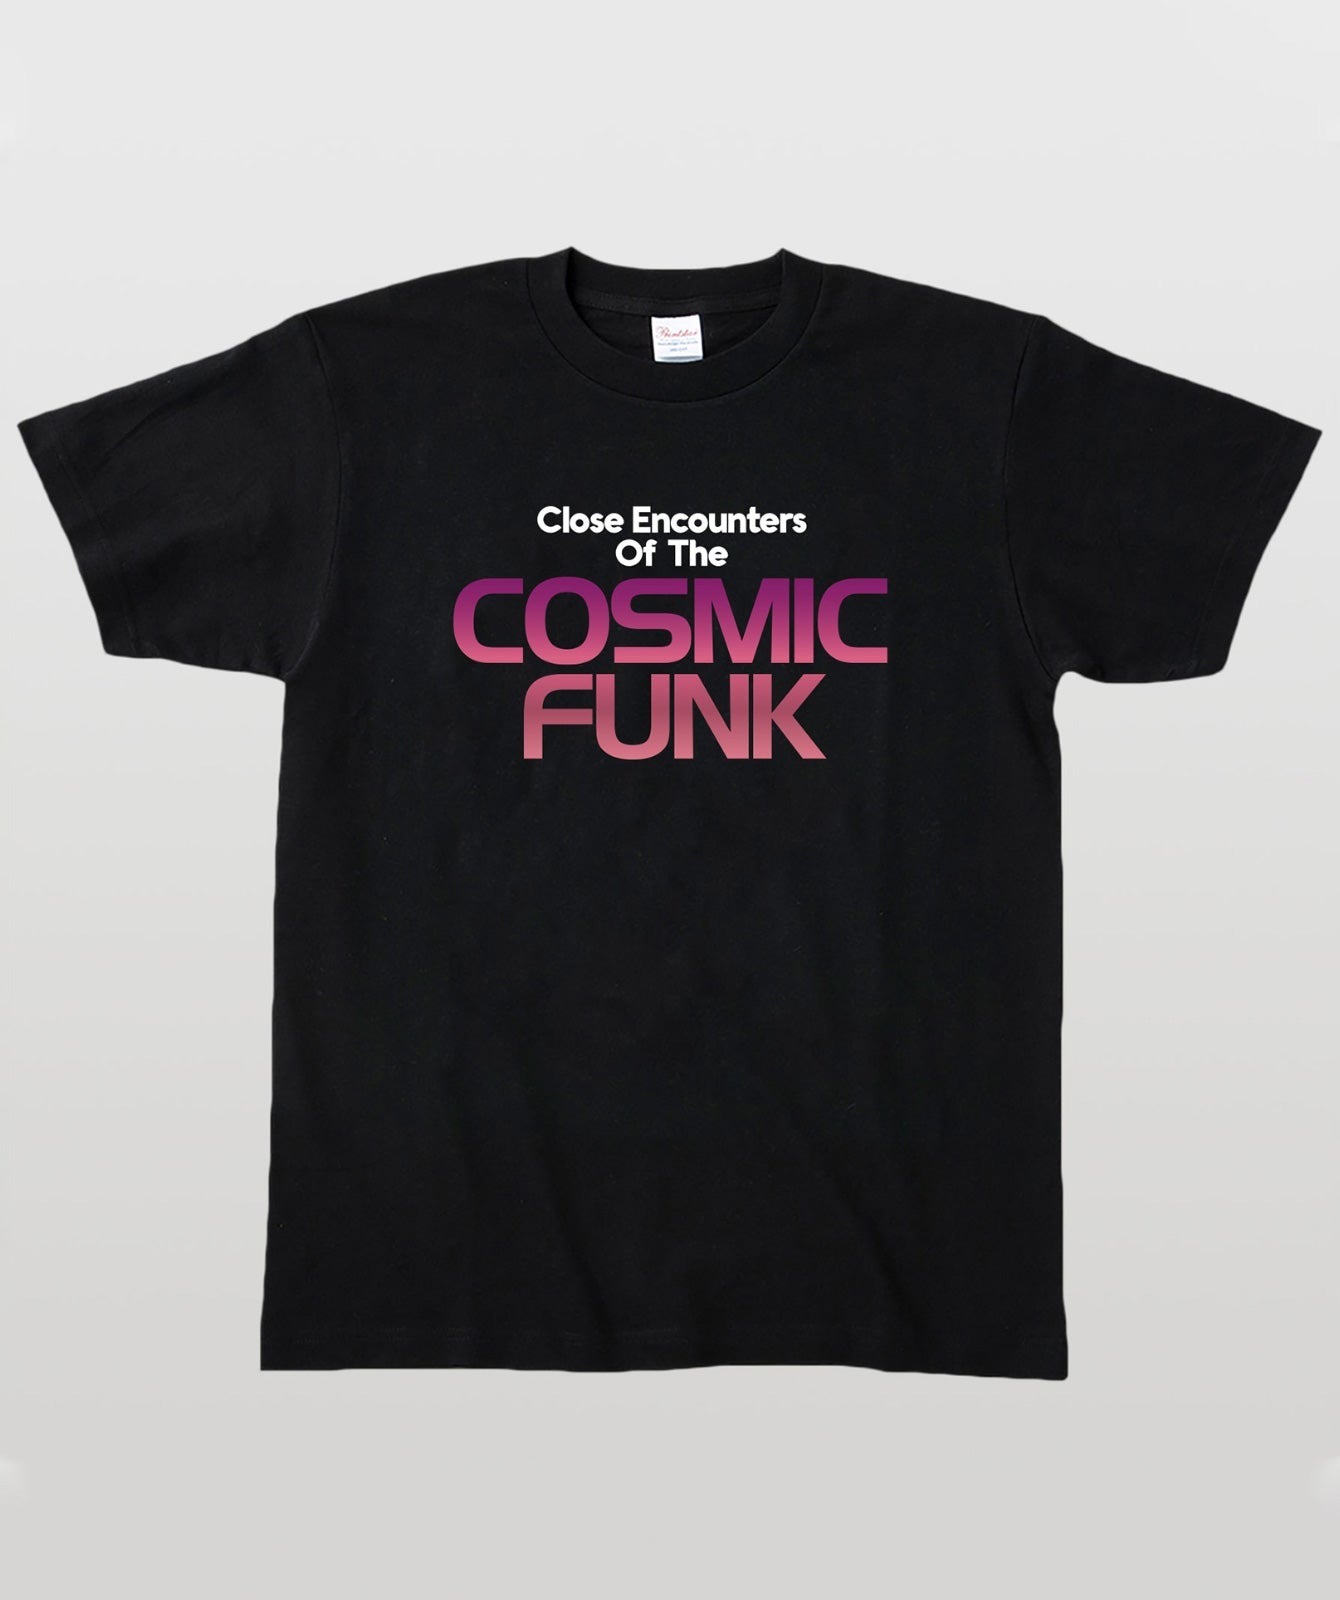 Close Encounters Of The COSMIC FUNK